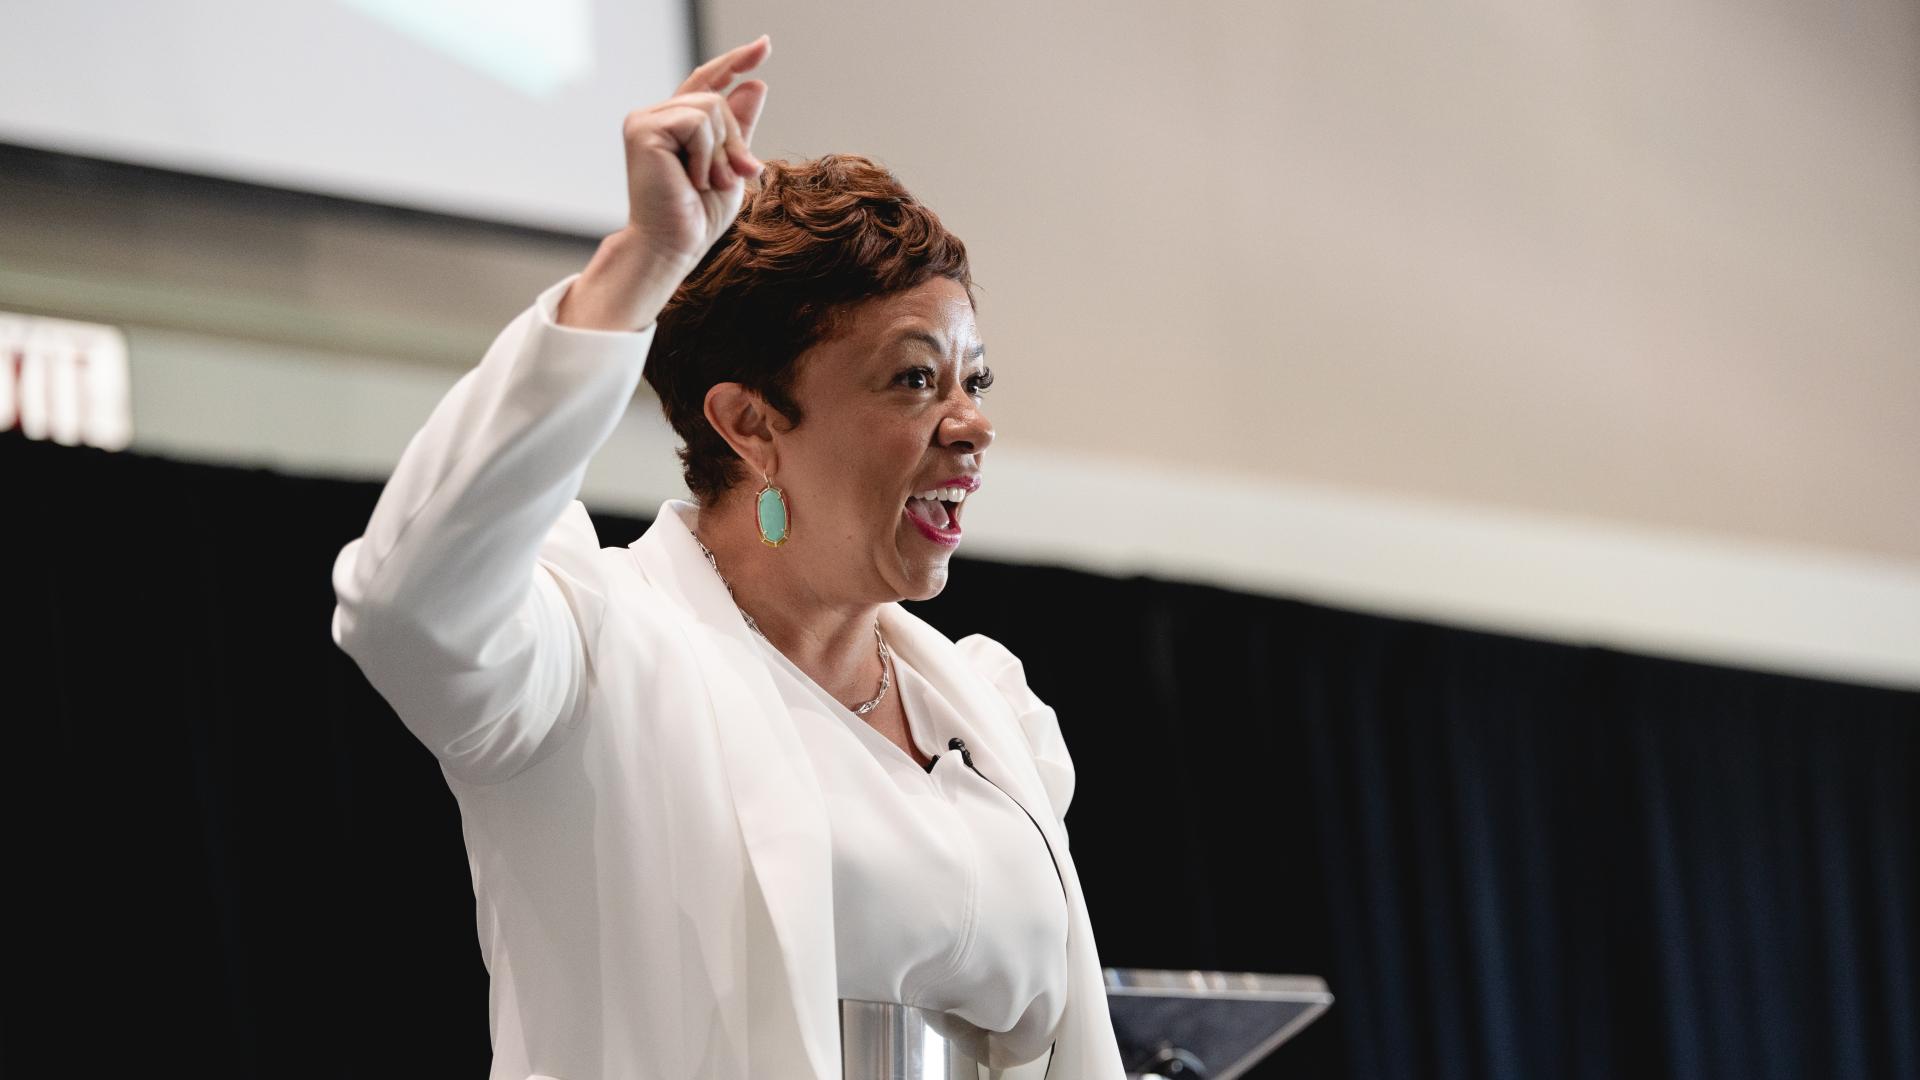 Confident woman speaking passionately on stage at a conference.